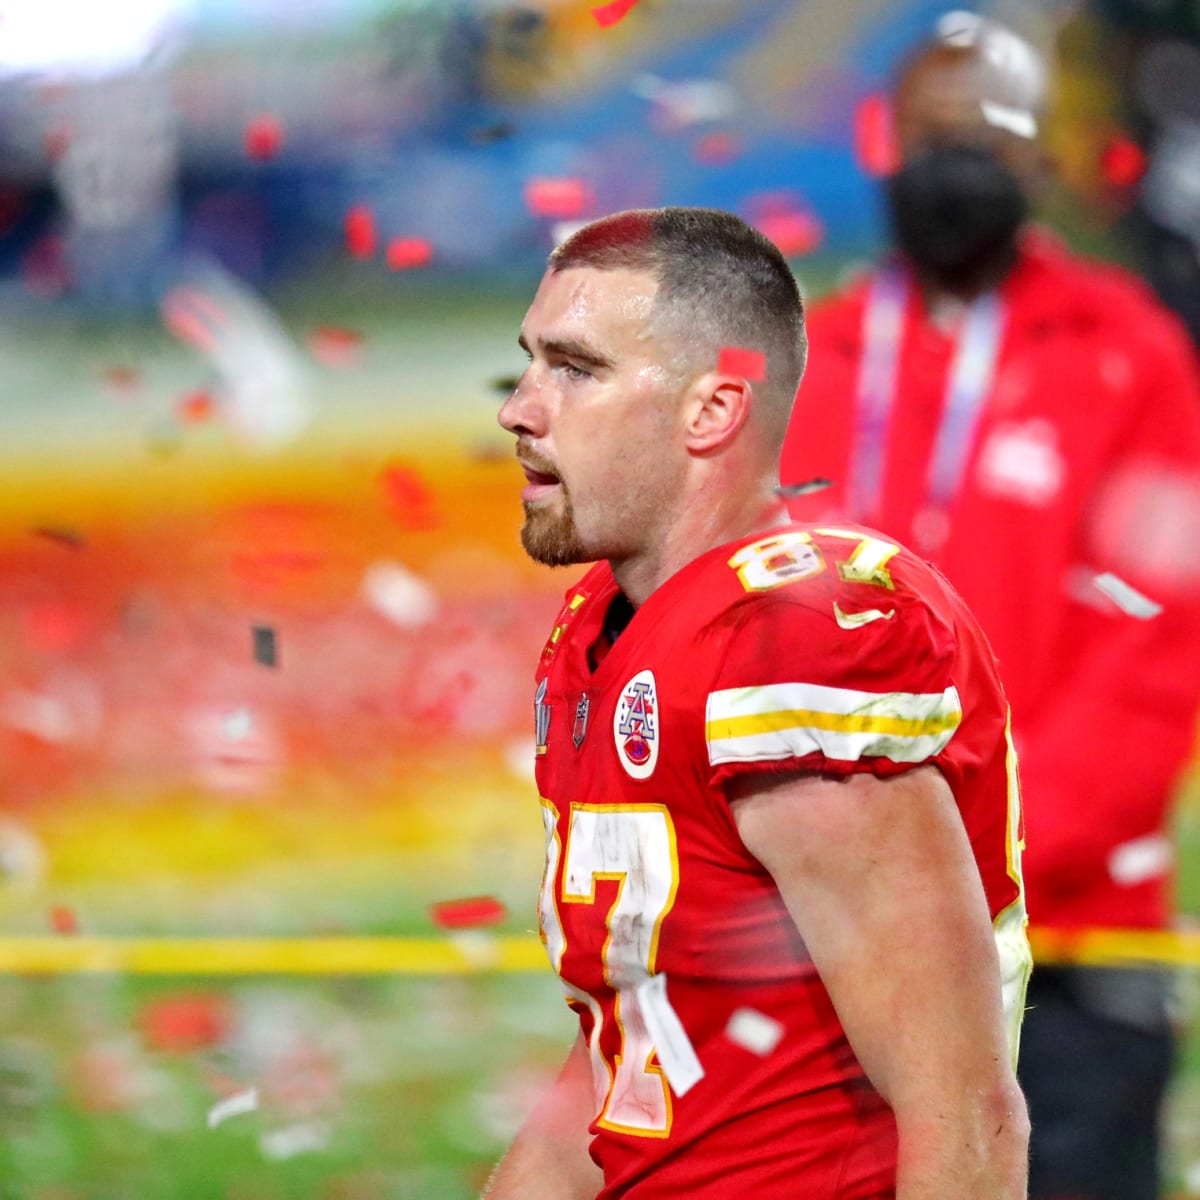 Three Takeaways From the Kansas City Chiefs' 31-9 Loss to Tampa